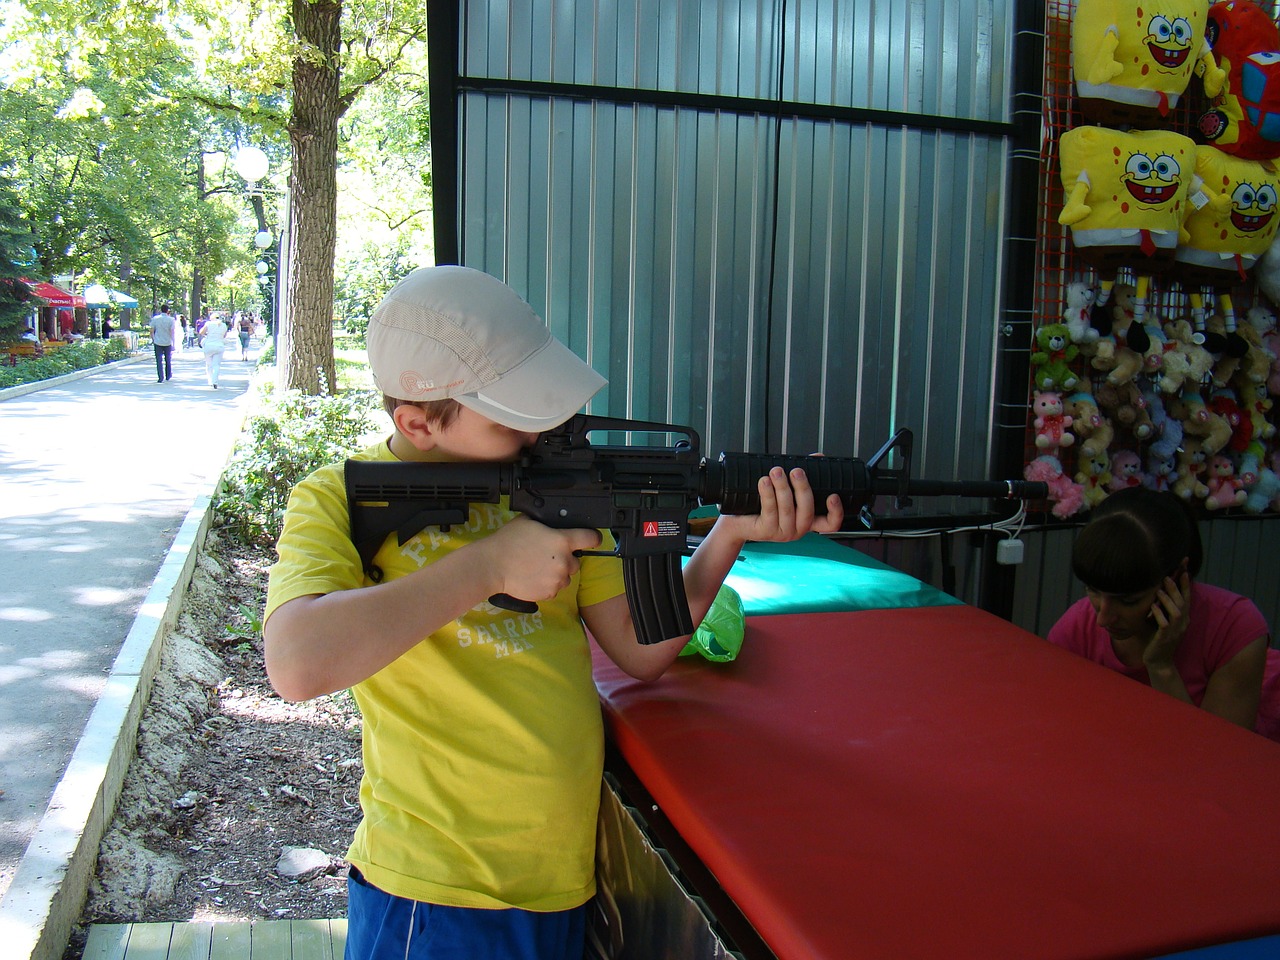 shooting gallery attraction boy free photo